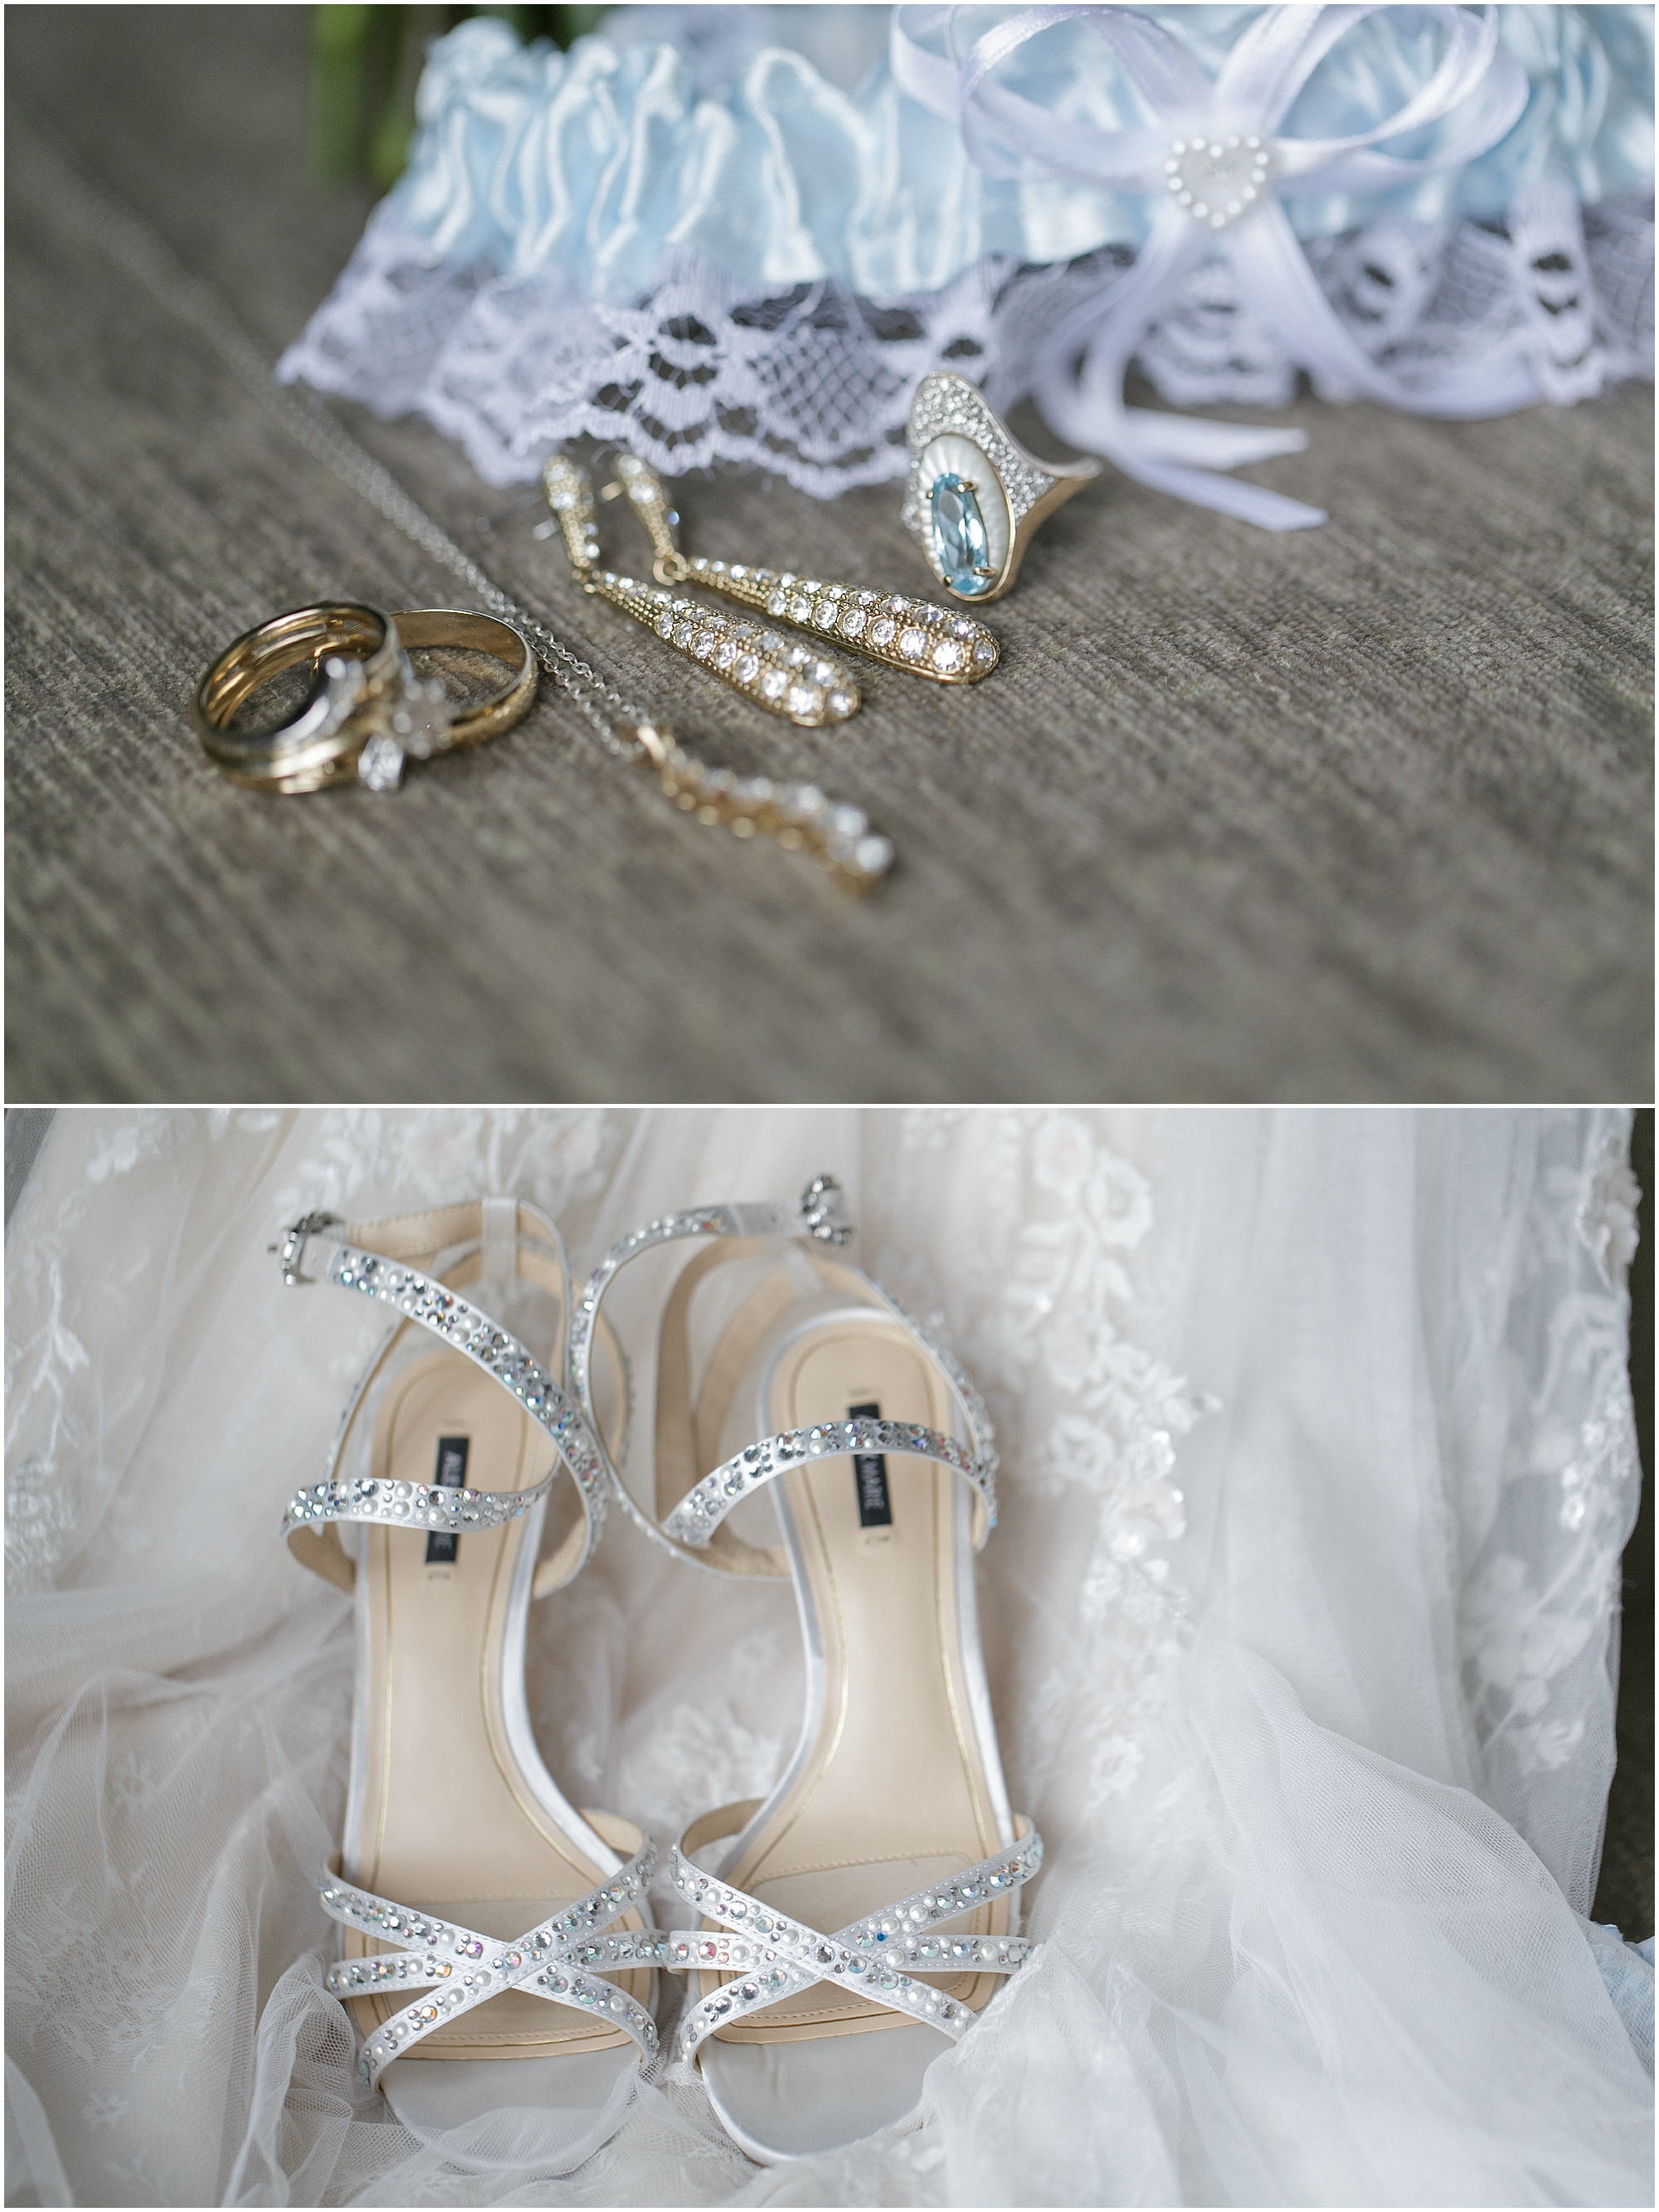 Bridal accessories like gold wedding rings, gold earrings and wedding shoes. 